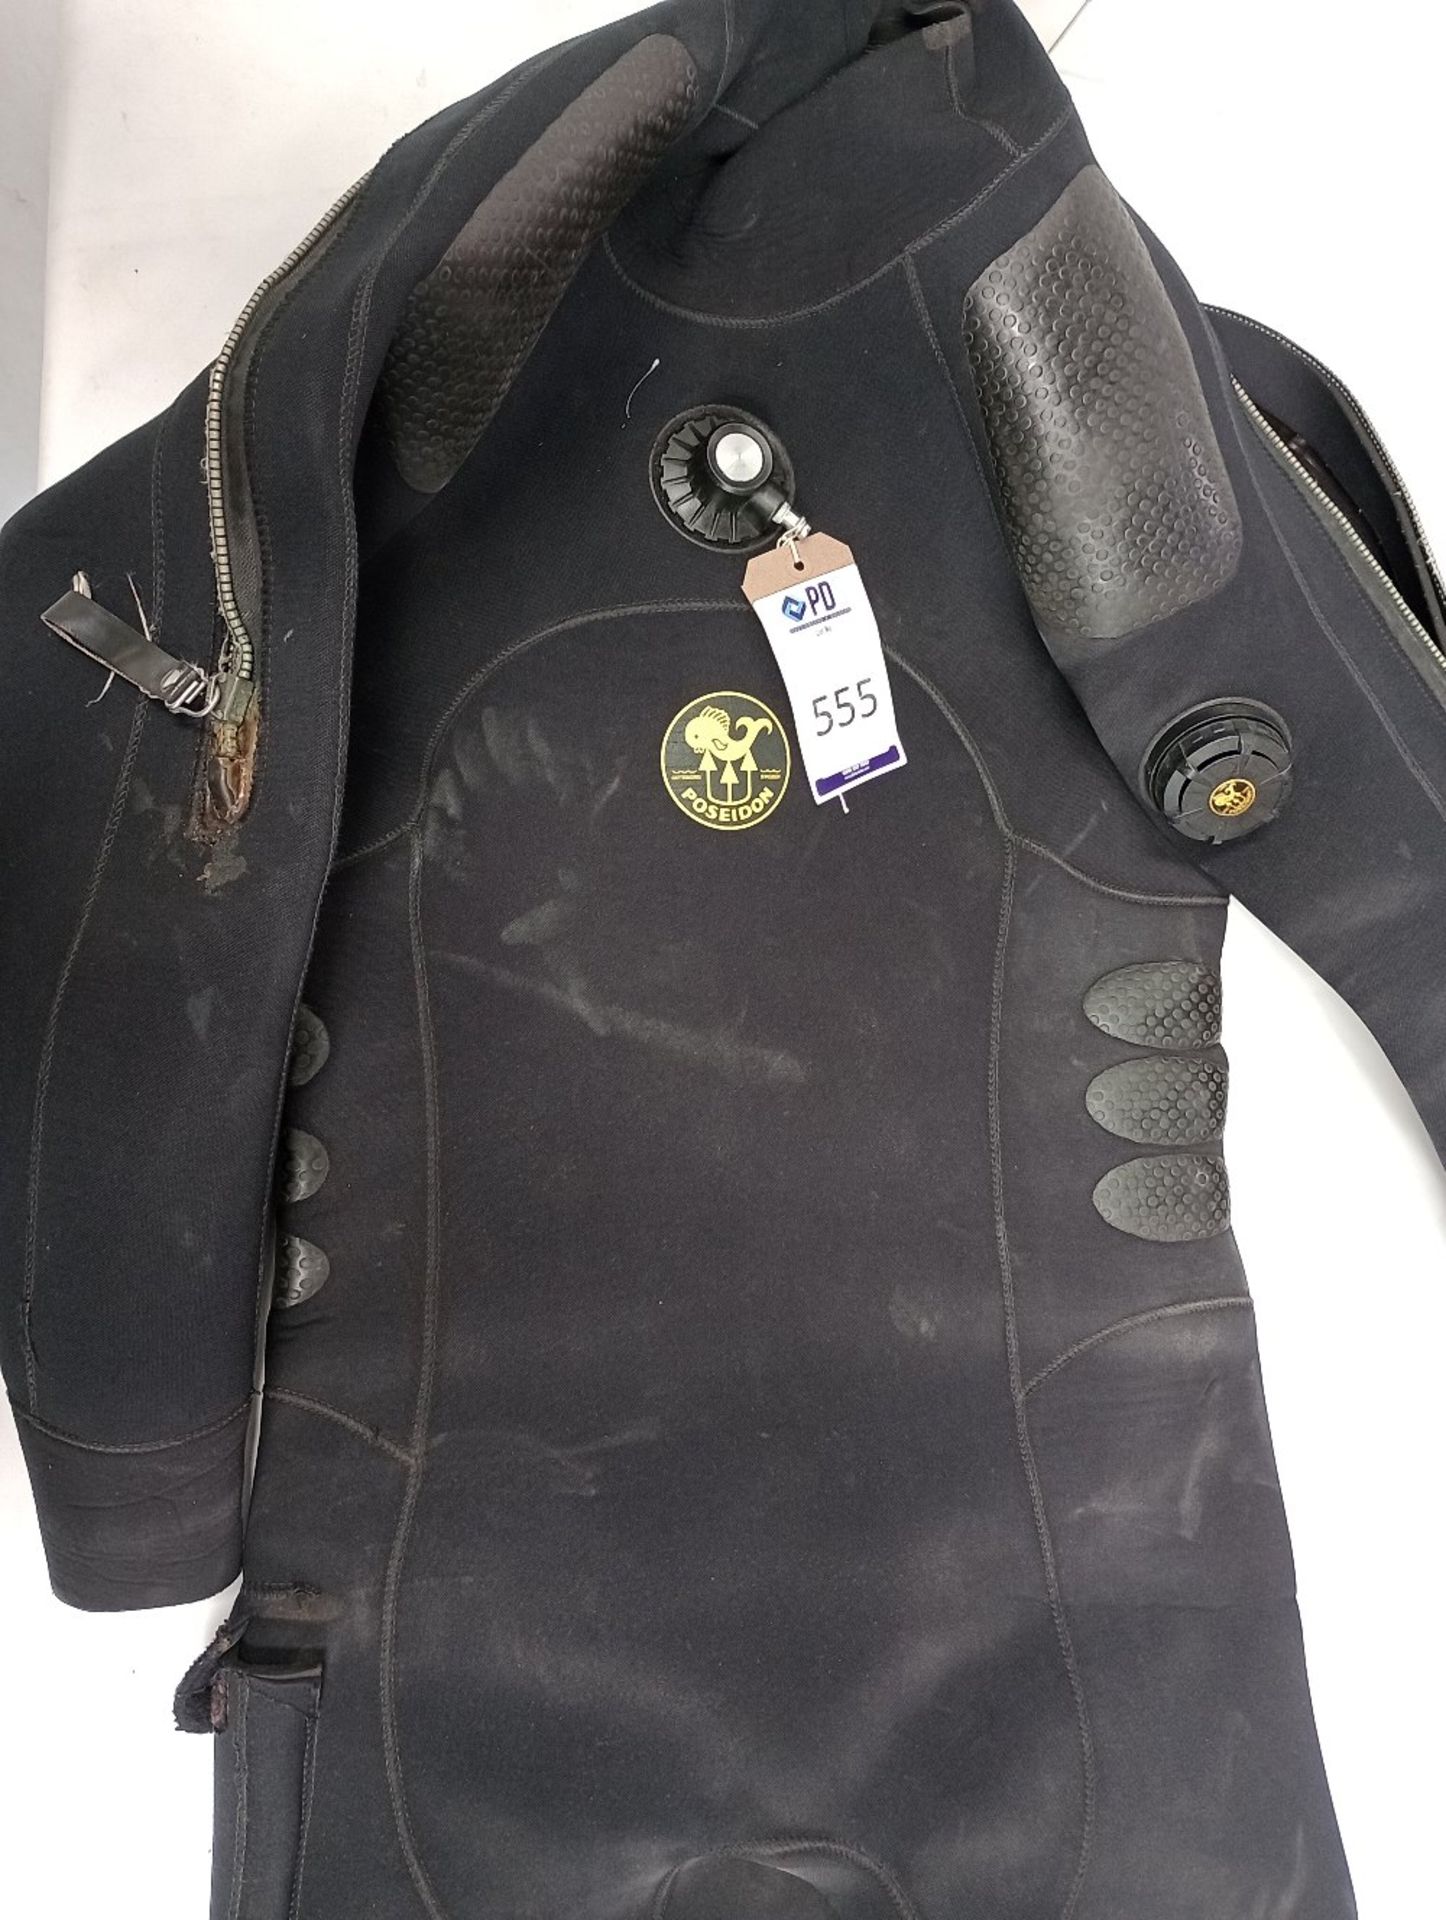 Poseidon Jetsuit Technica Drysuit, Serial No. 717-L-1, Size L (Location: Brentwood. Please Refer - Image 3 of 4